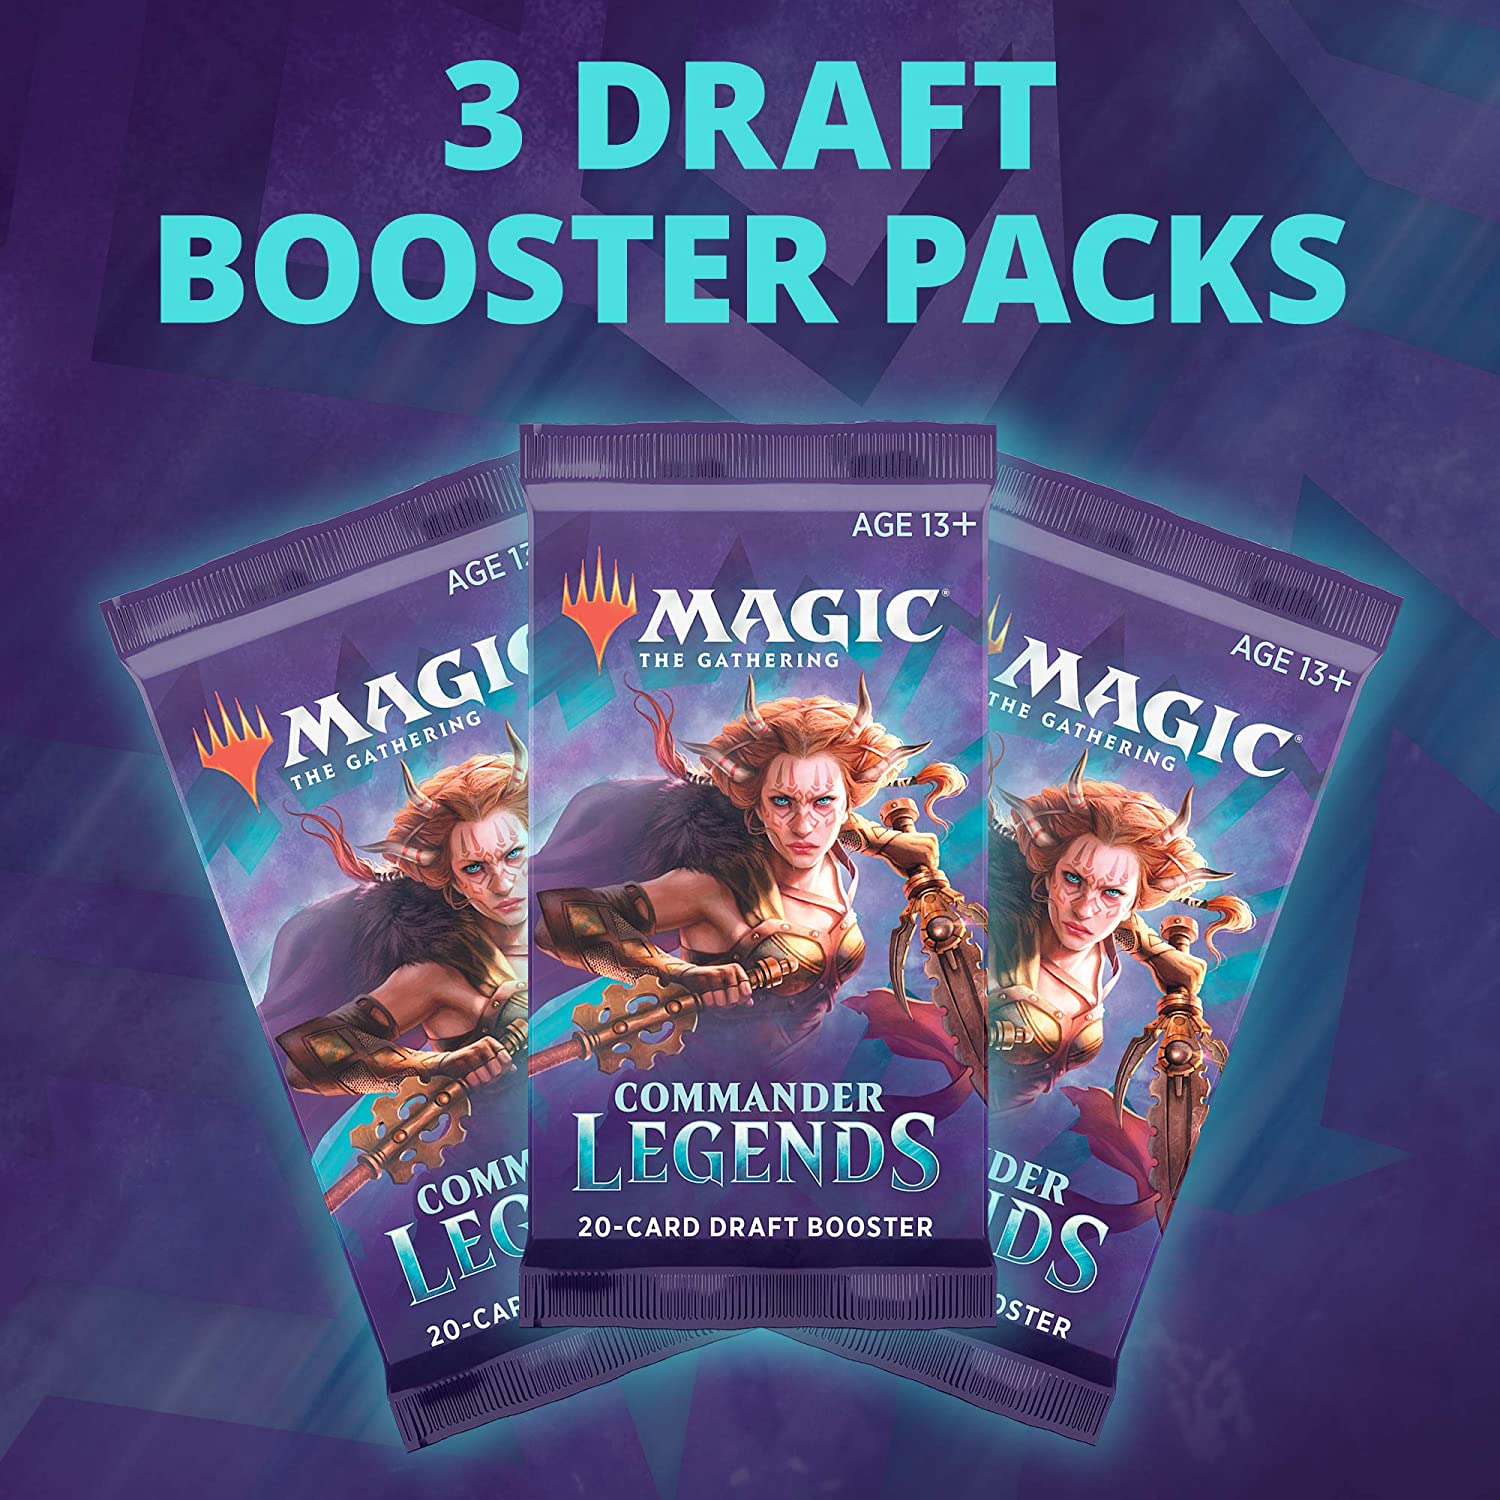 Magic The Gathering, Magic The Gathering Commander Legends 3-Booster Draft Pack 60 Cards 2 Legends Per Pack (C63300000)